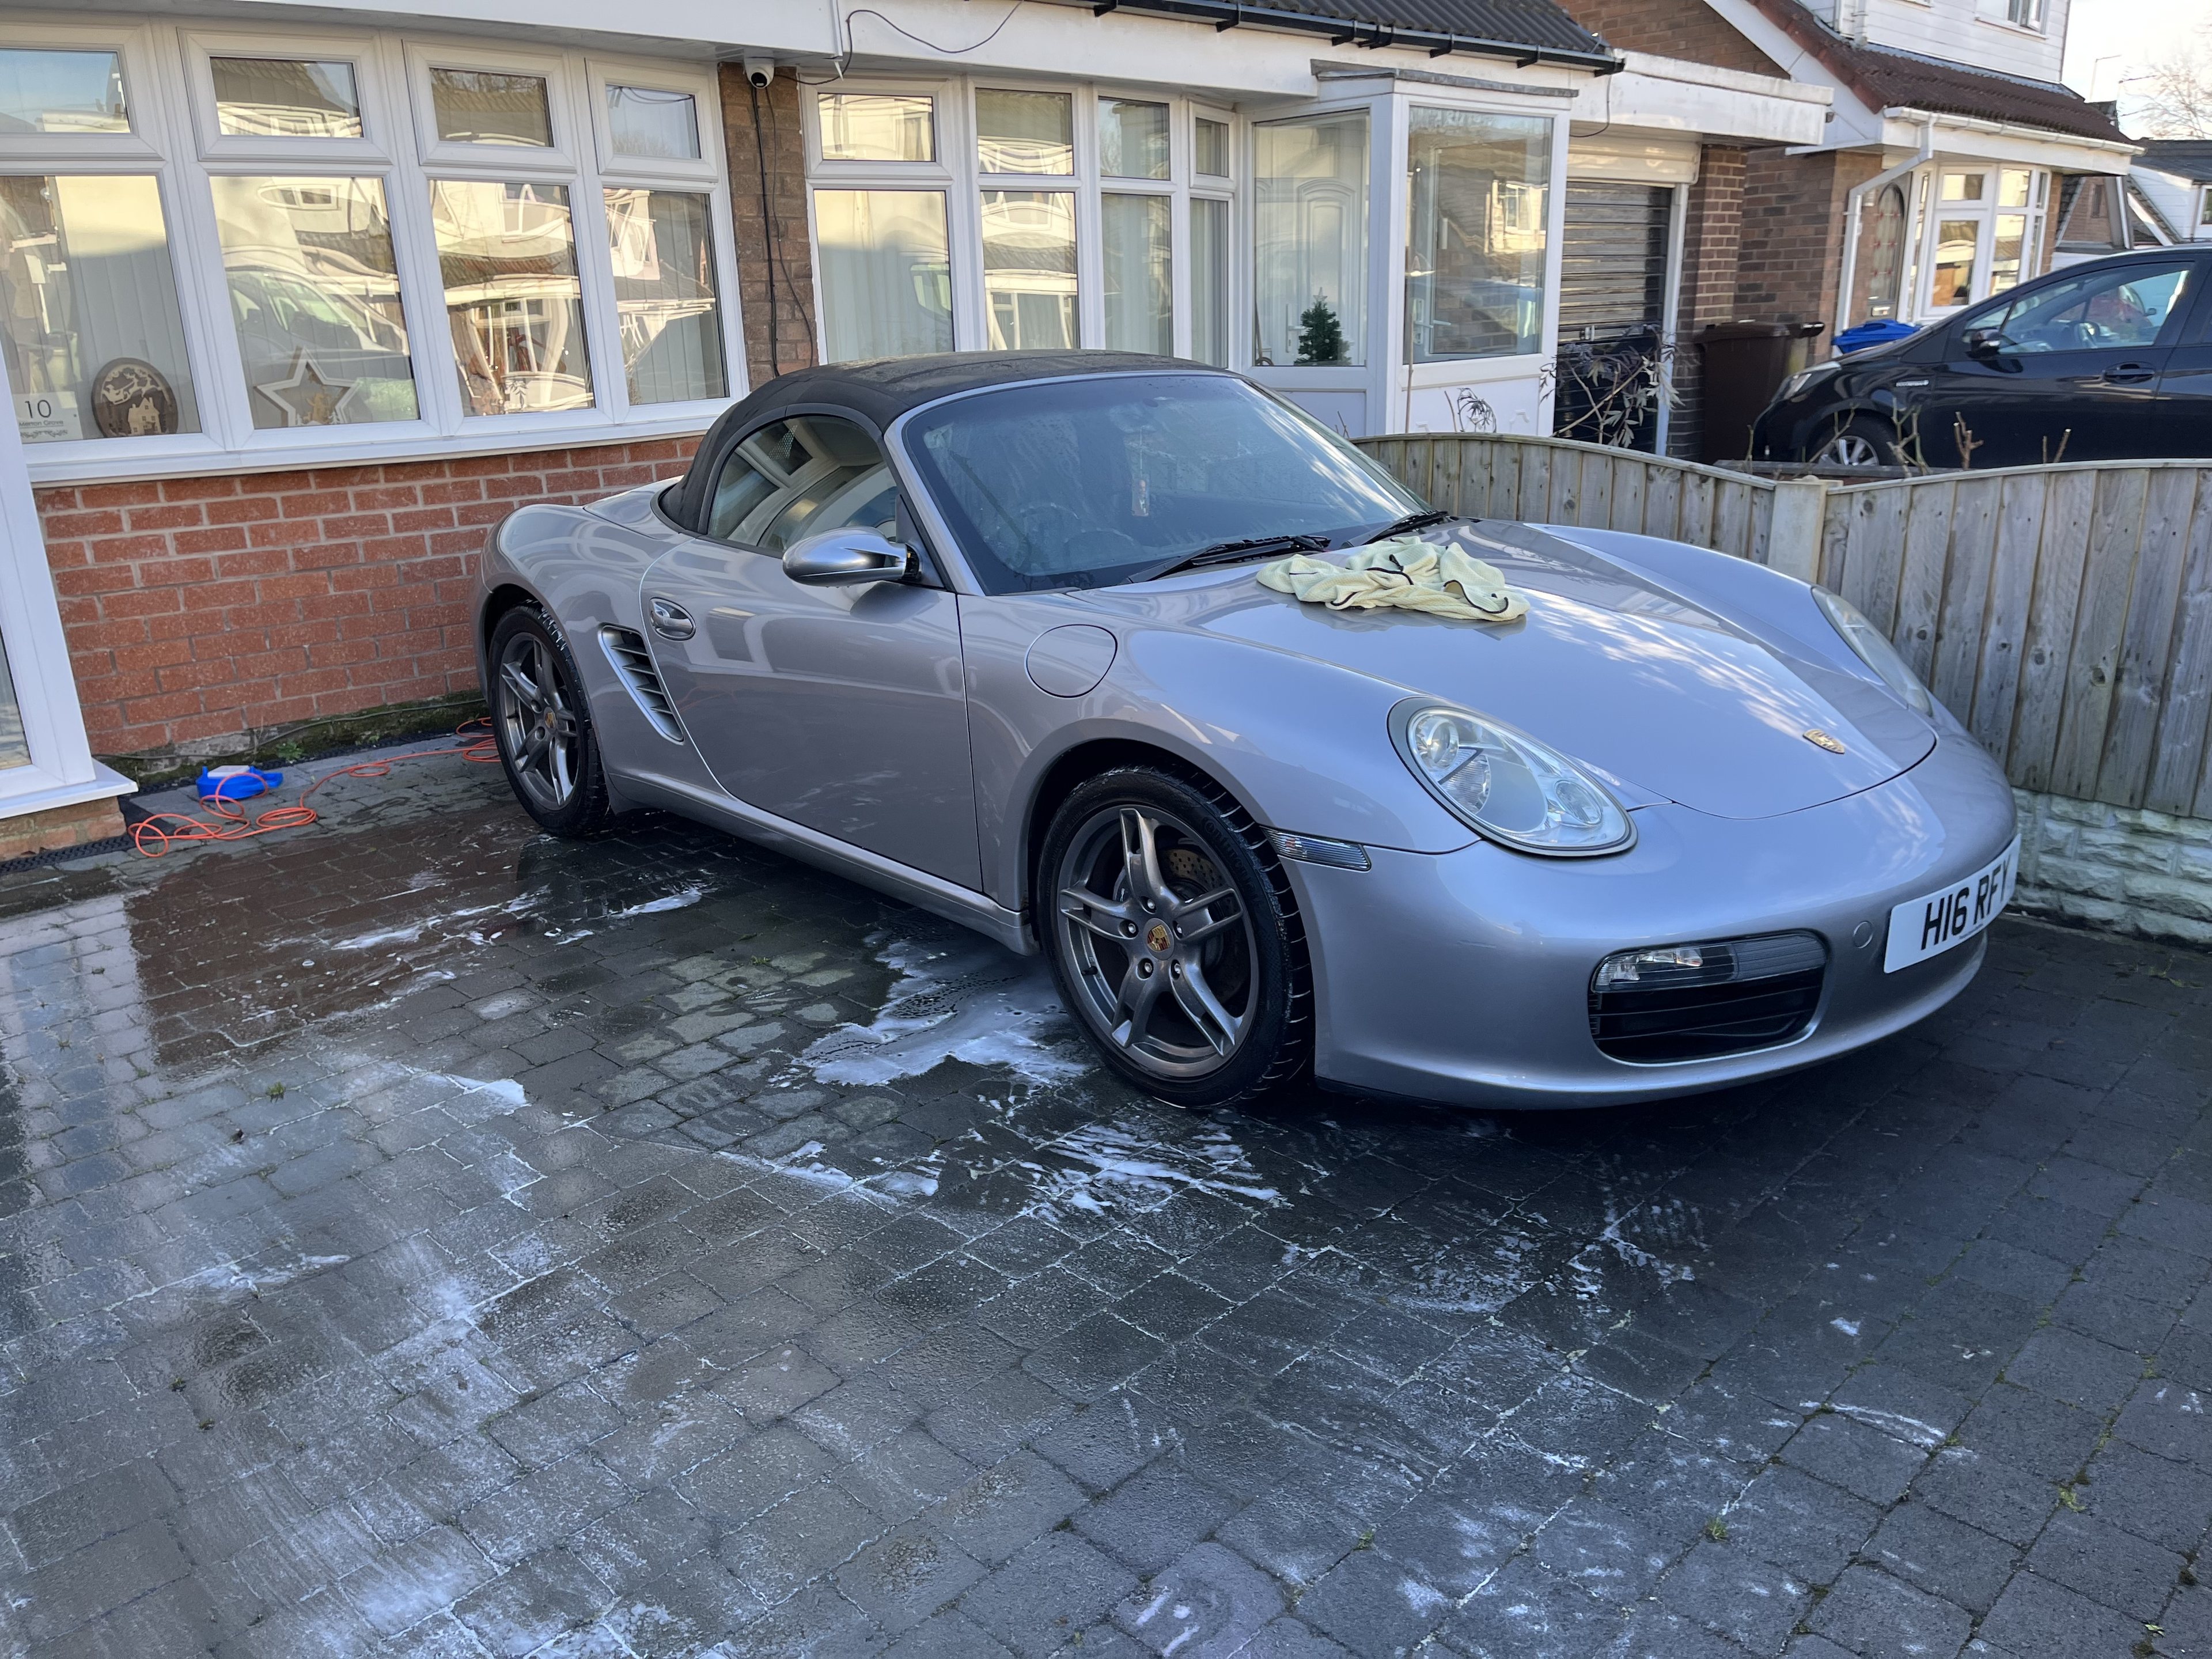 2005 Porsche Boxster 987 2.7 - Page 6 - Readers' Cars - PistonHeads UK